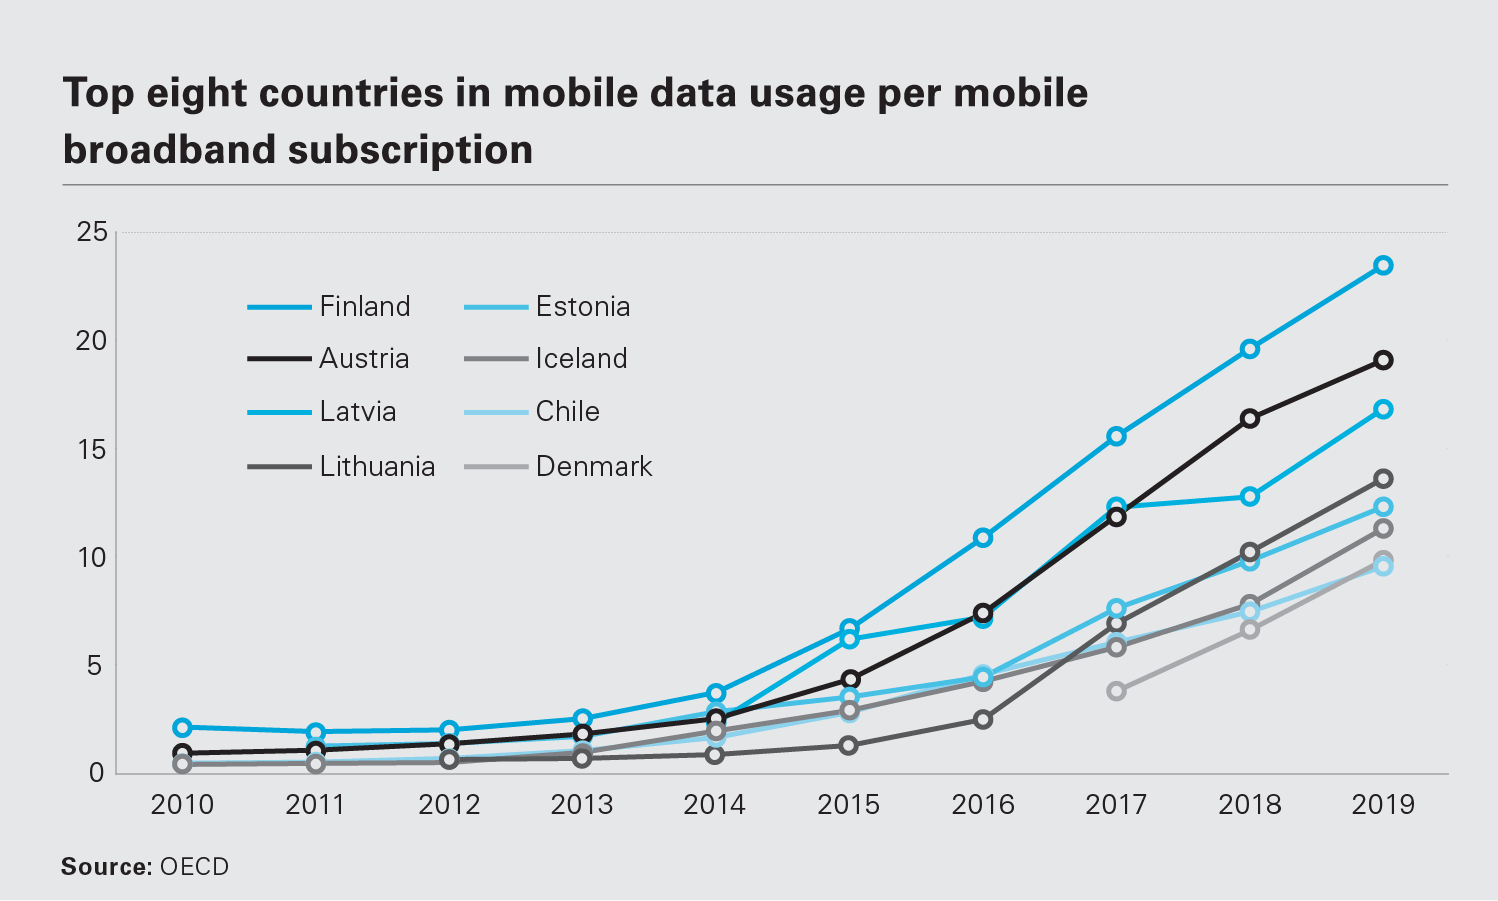 Top-eight countries in mobile data usage per mobile broadband subscription